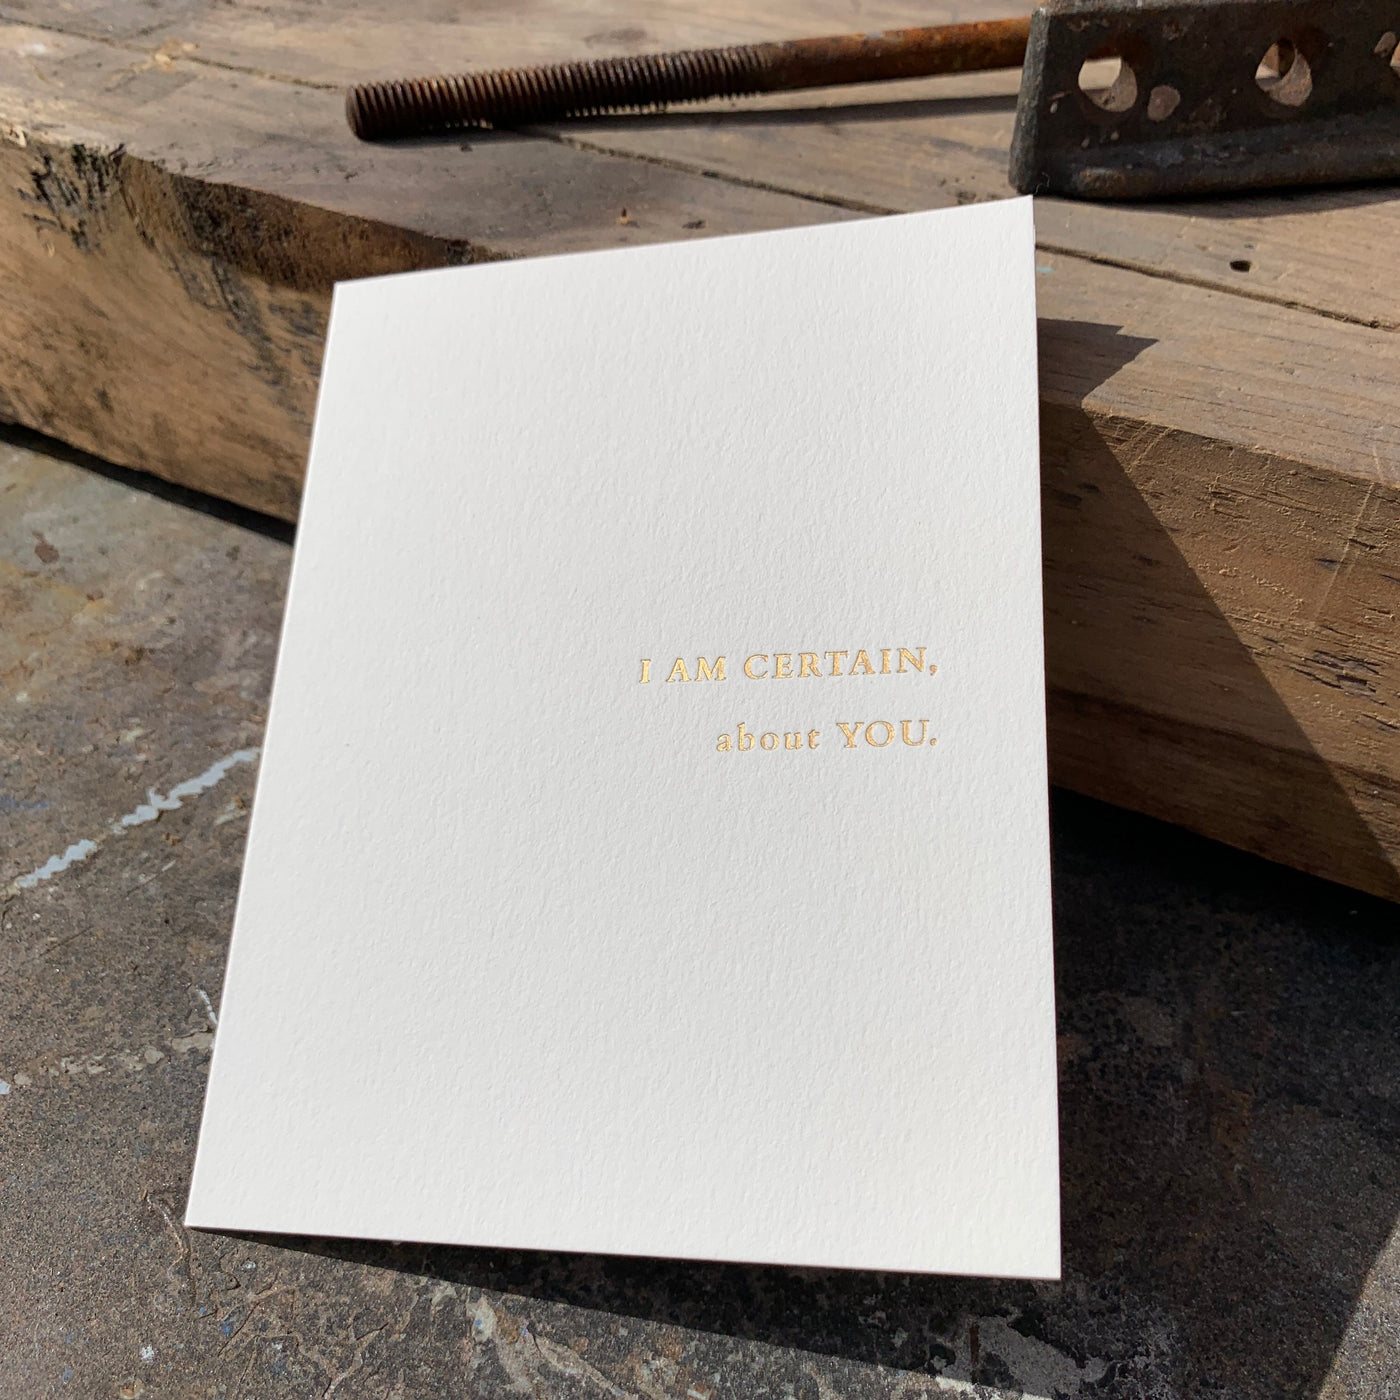 Greeting card on wood table by beknown. I am certain, about you.